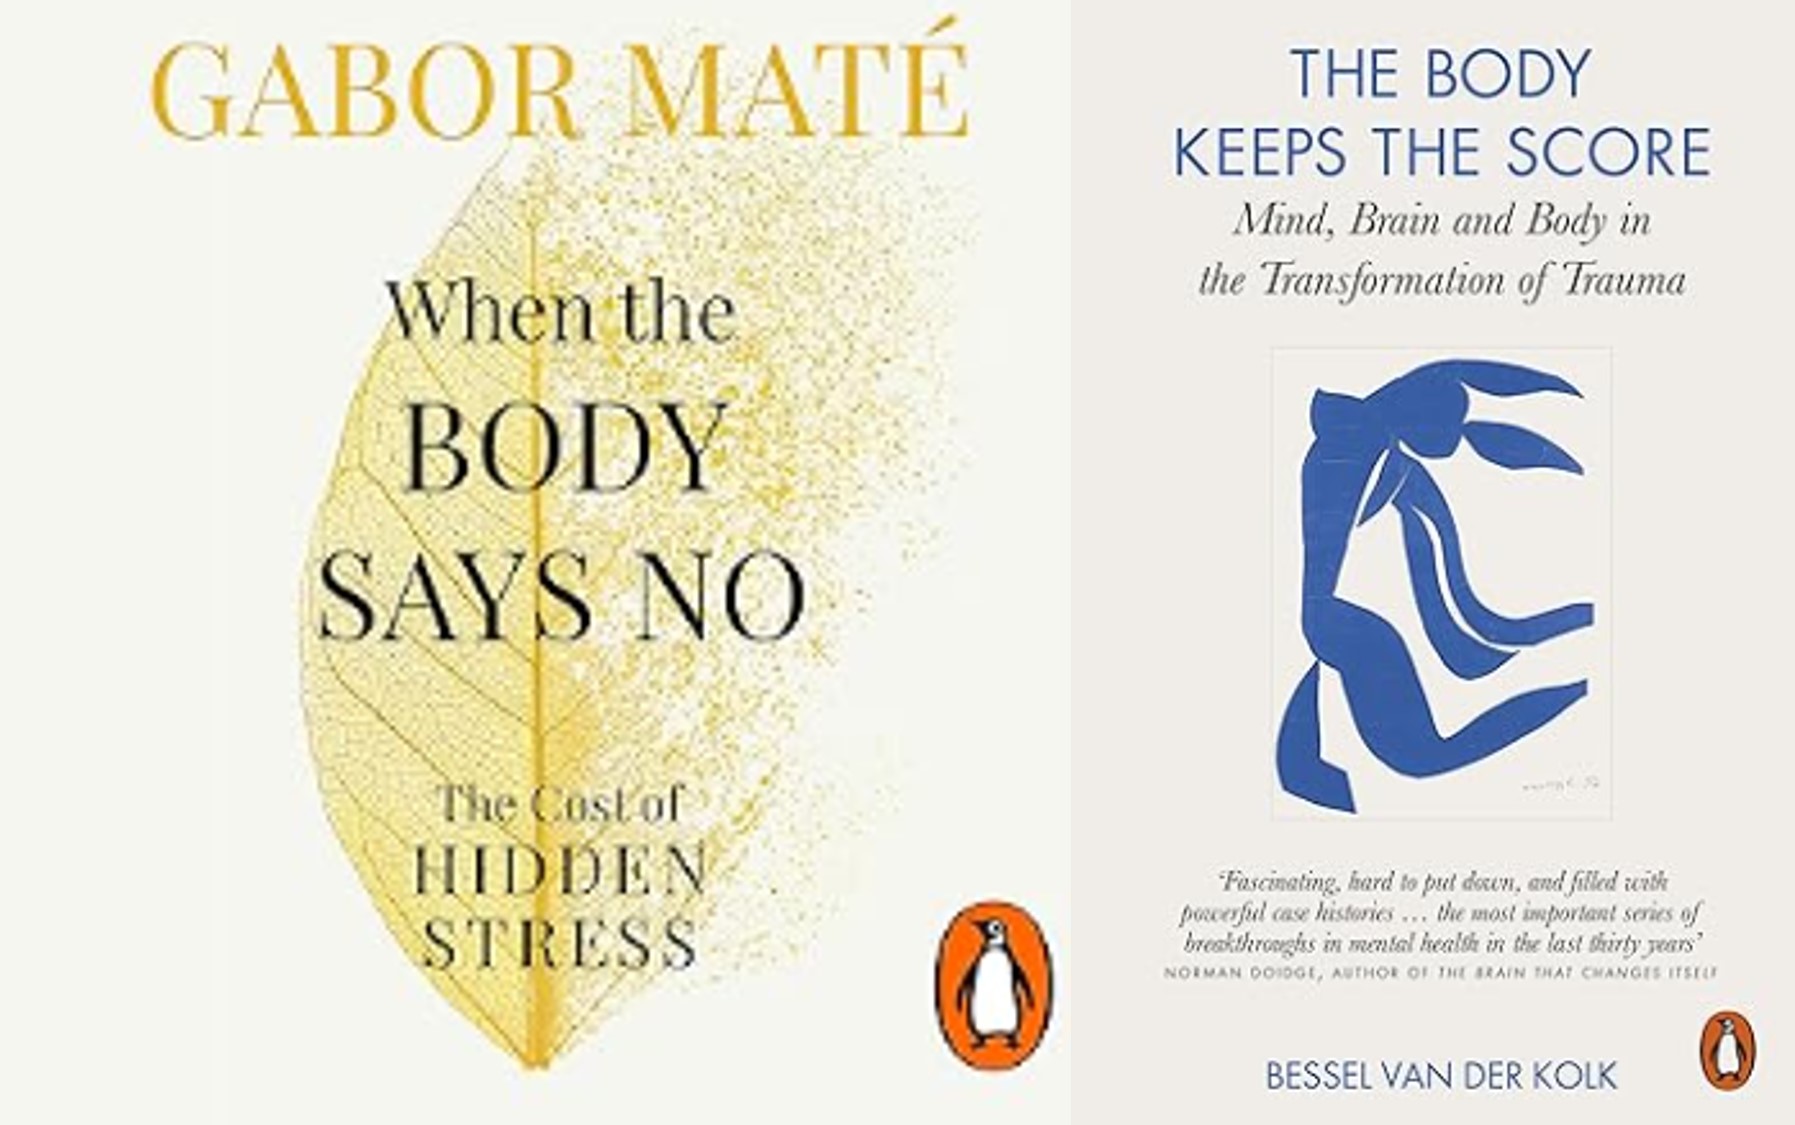 Book reviews on stress and trauma – “When the body says No” (Gabor Mate) and “The body keeps the score” (Dr Bessel Van der Kolk)